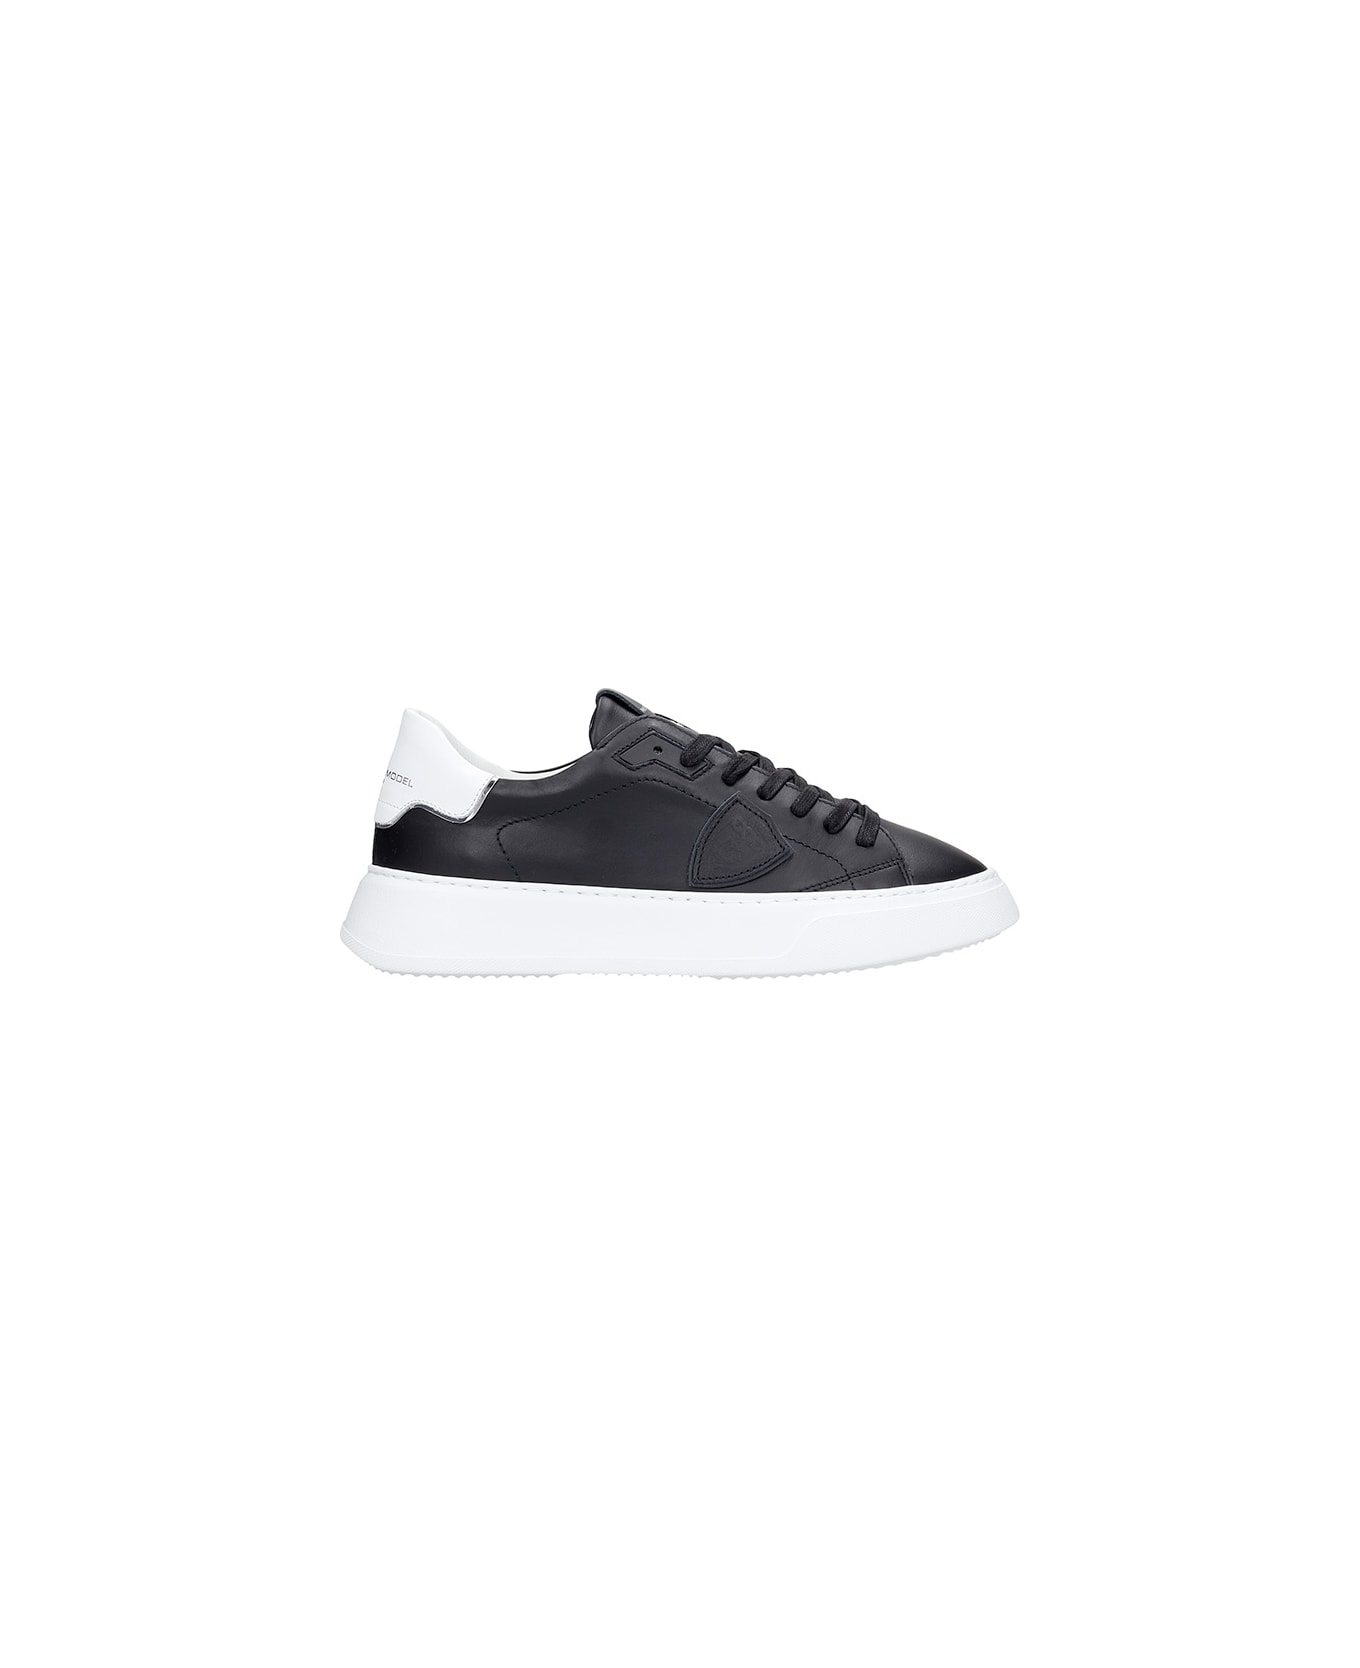 Philippe Model Temple L Sneakers In Black Leather - Black スニーカー